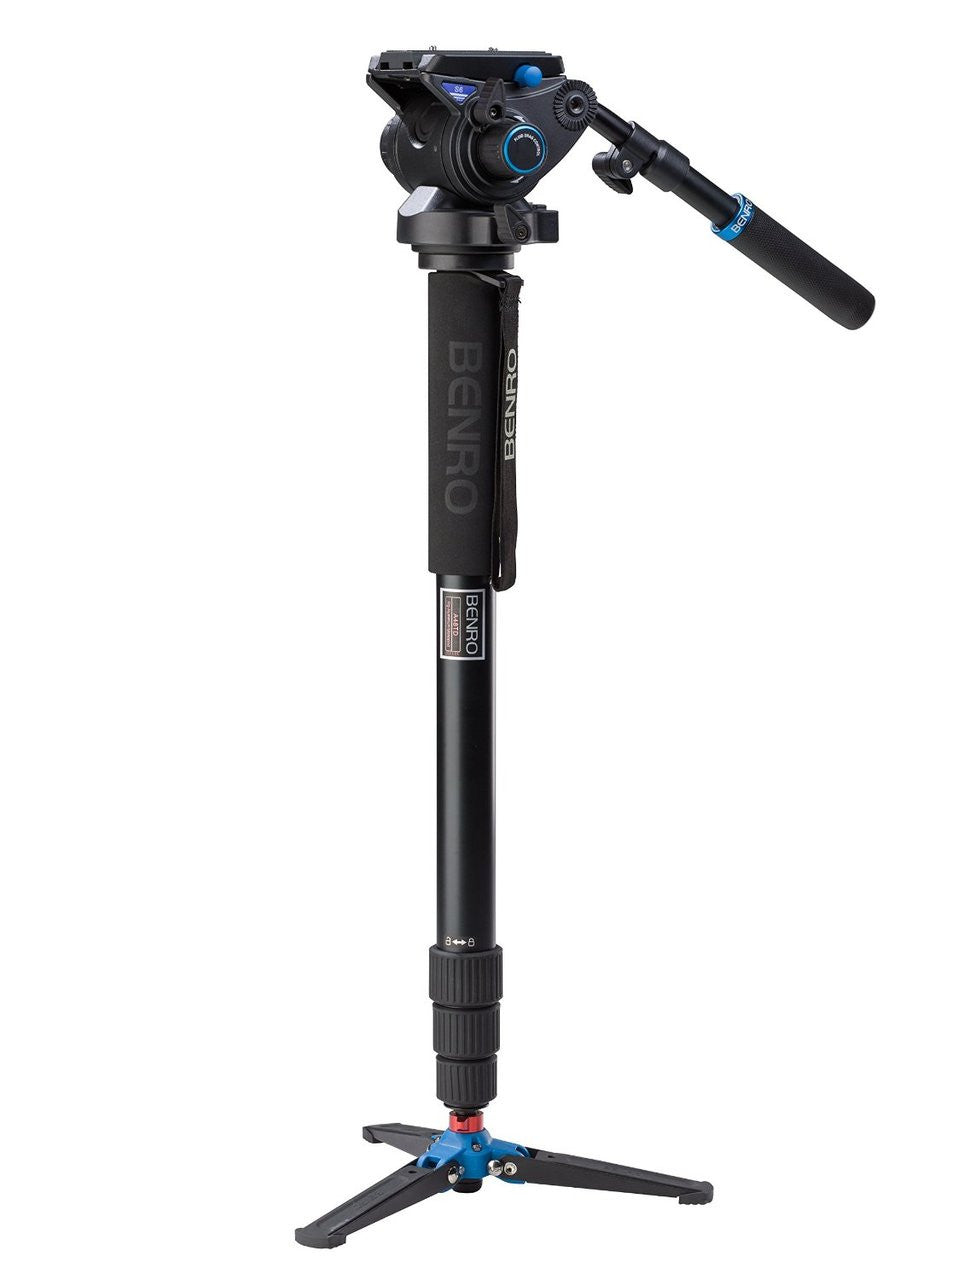 Benro A48TDS6 Series 4 Aluminum Monopod with 3-Leg Locking Base and S6 Video Head